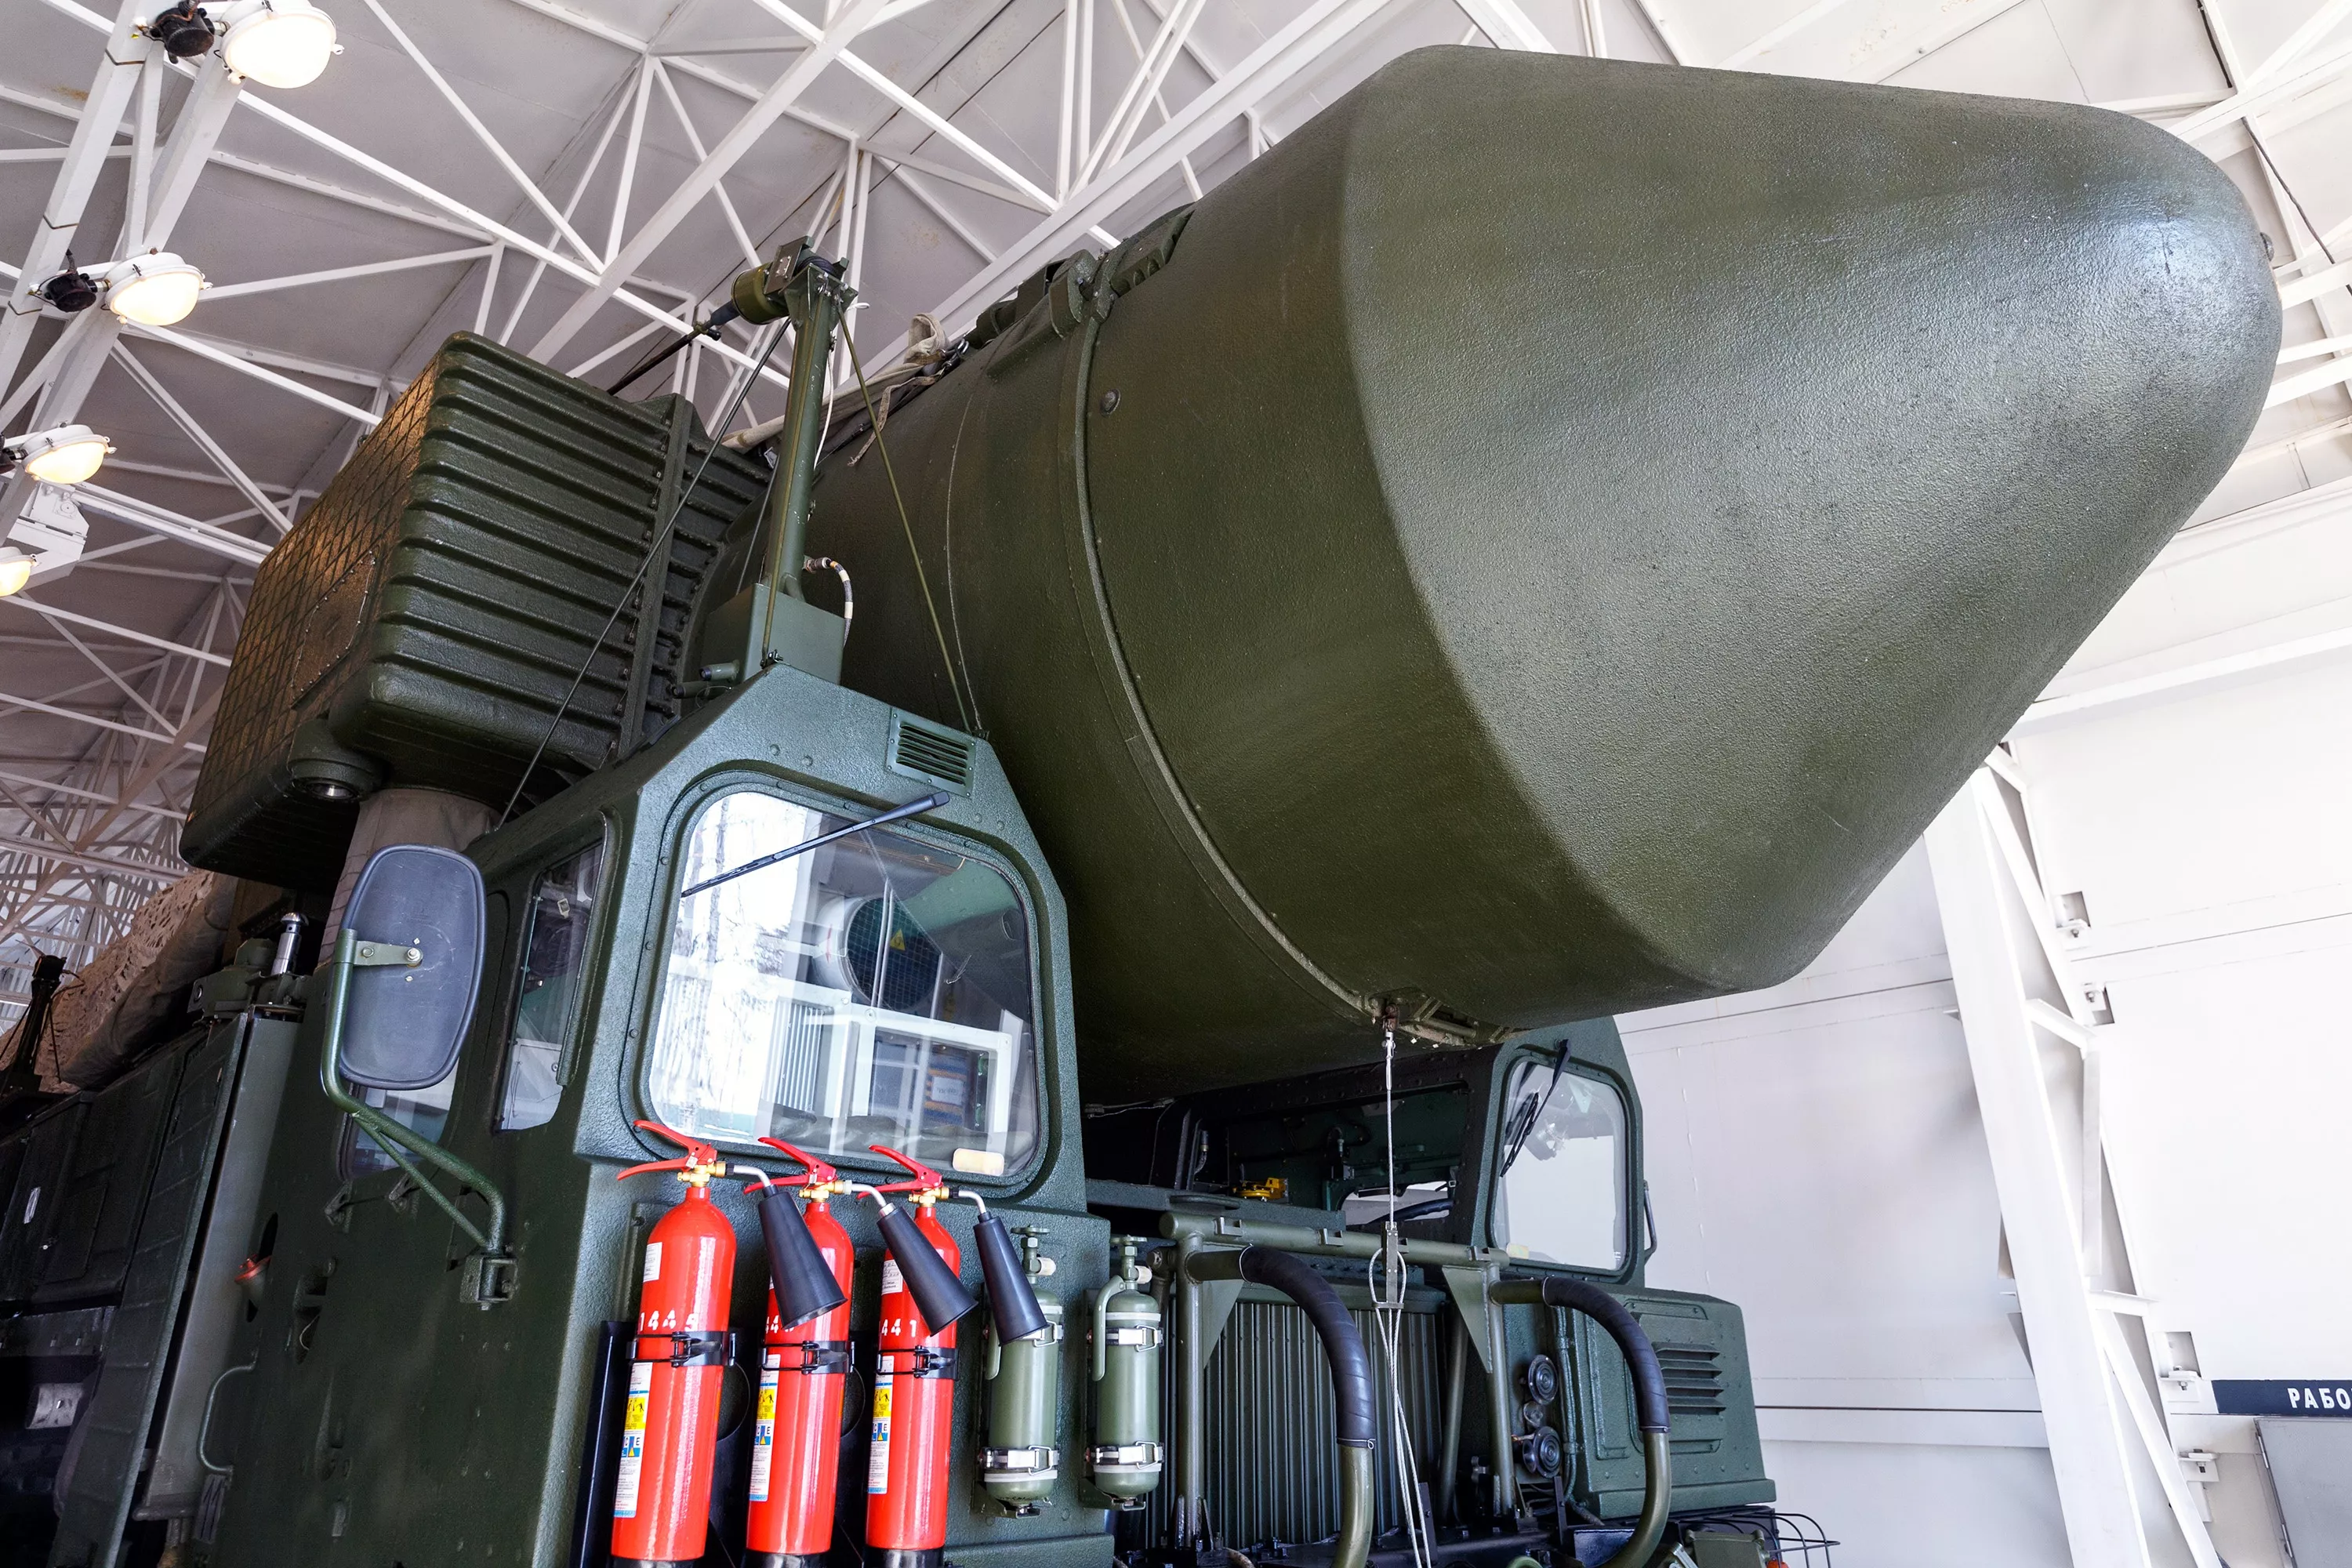 The Russians have launched the SS-27 Mod 2 intercontinental ballistic missile with a range of 12,000 kilometres, which can carry a nuclear warhead with a yield of up to 500 kilotons-5